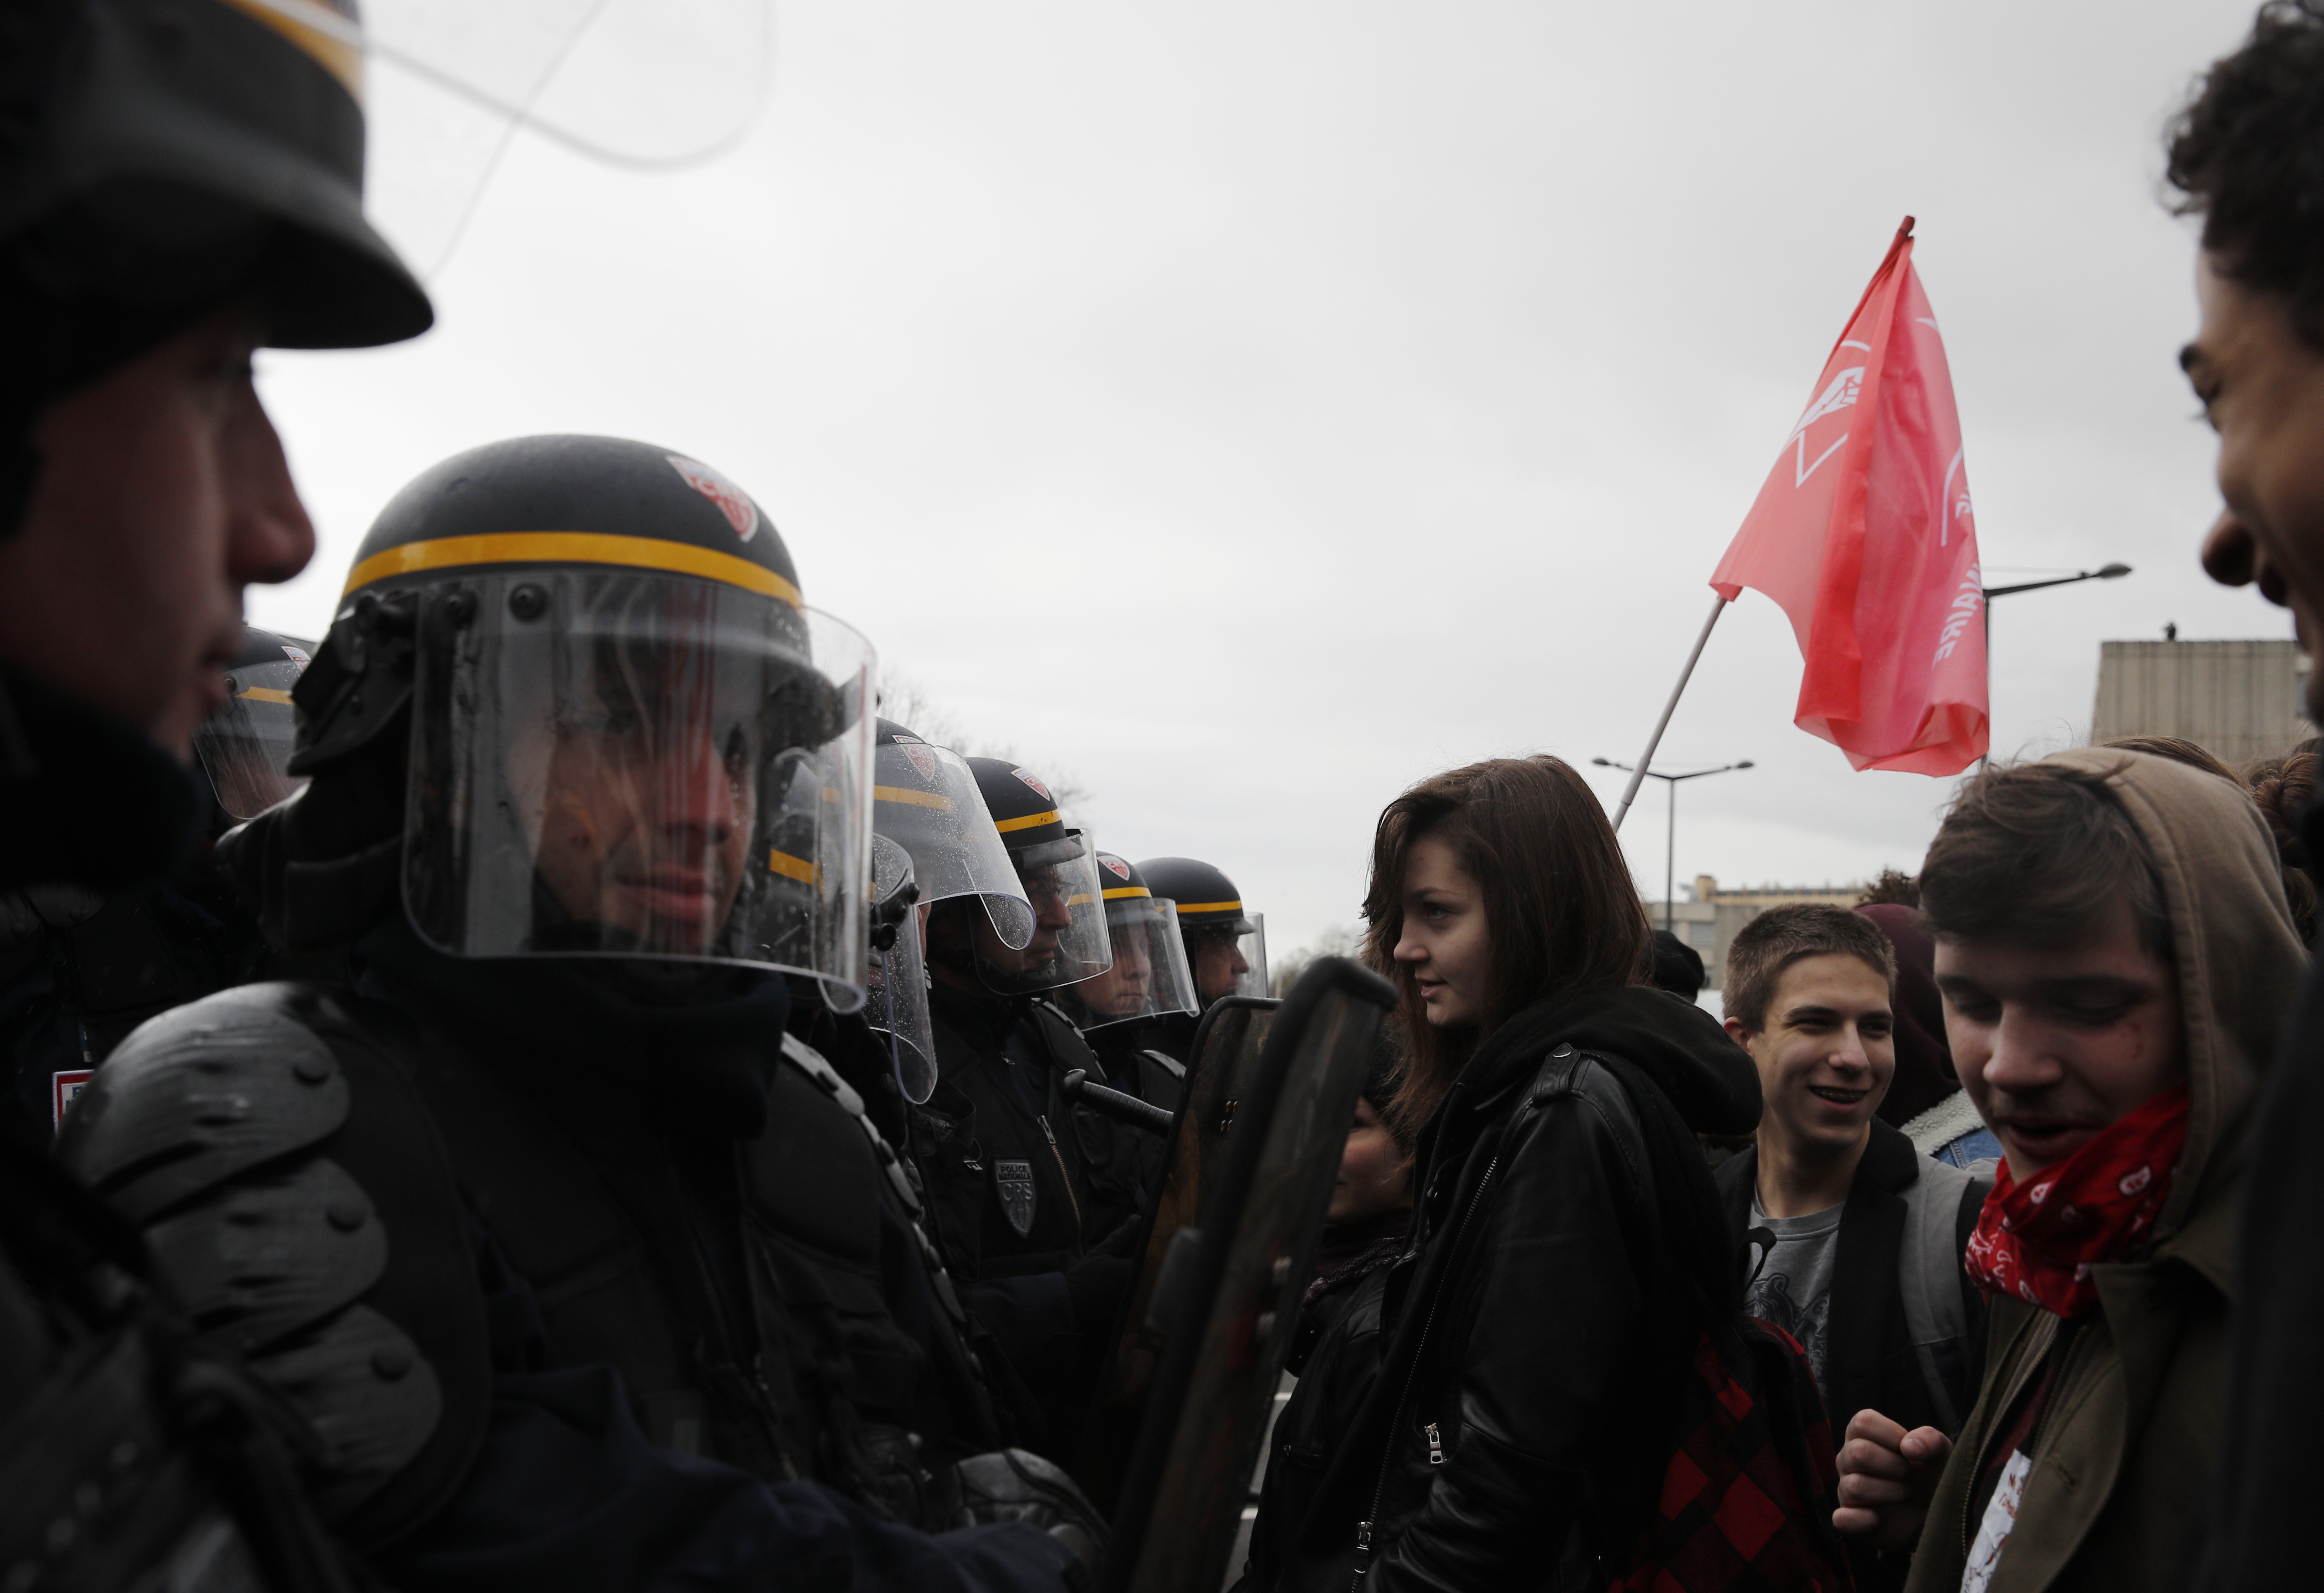 Students face riot police officer as they demonstrate outside the Rouen hospital, Normandy, Thursday, April 5, 2018 ahead of French President Emmanuel Macron's visit. Macron is unveiling a long-awaited autism plan, to help parents struggling to provide children on the autism spectrum with basic education and care. (AP Photo/Christophe Ena, Pool)